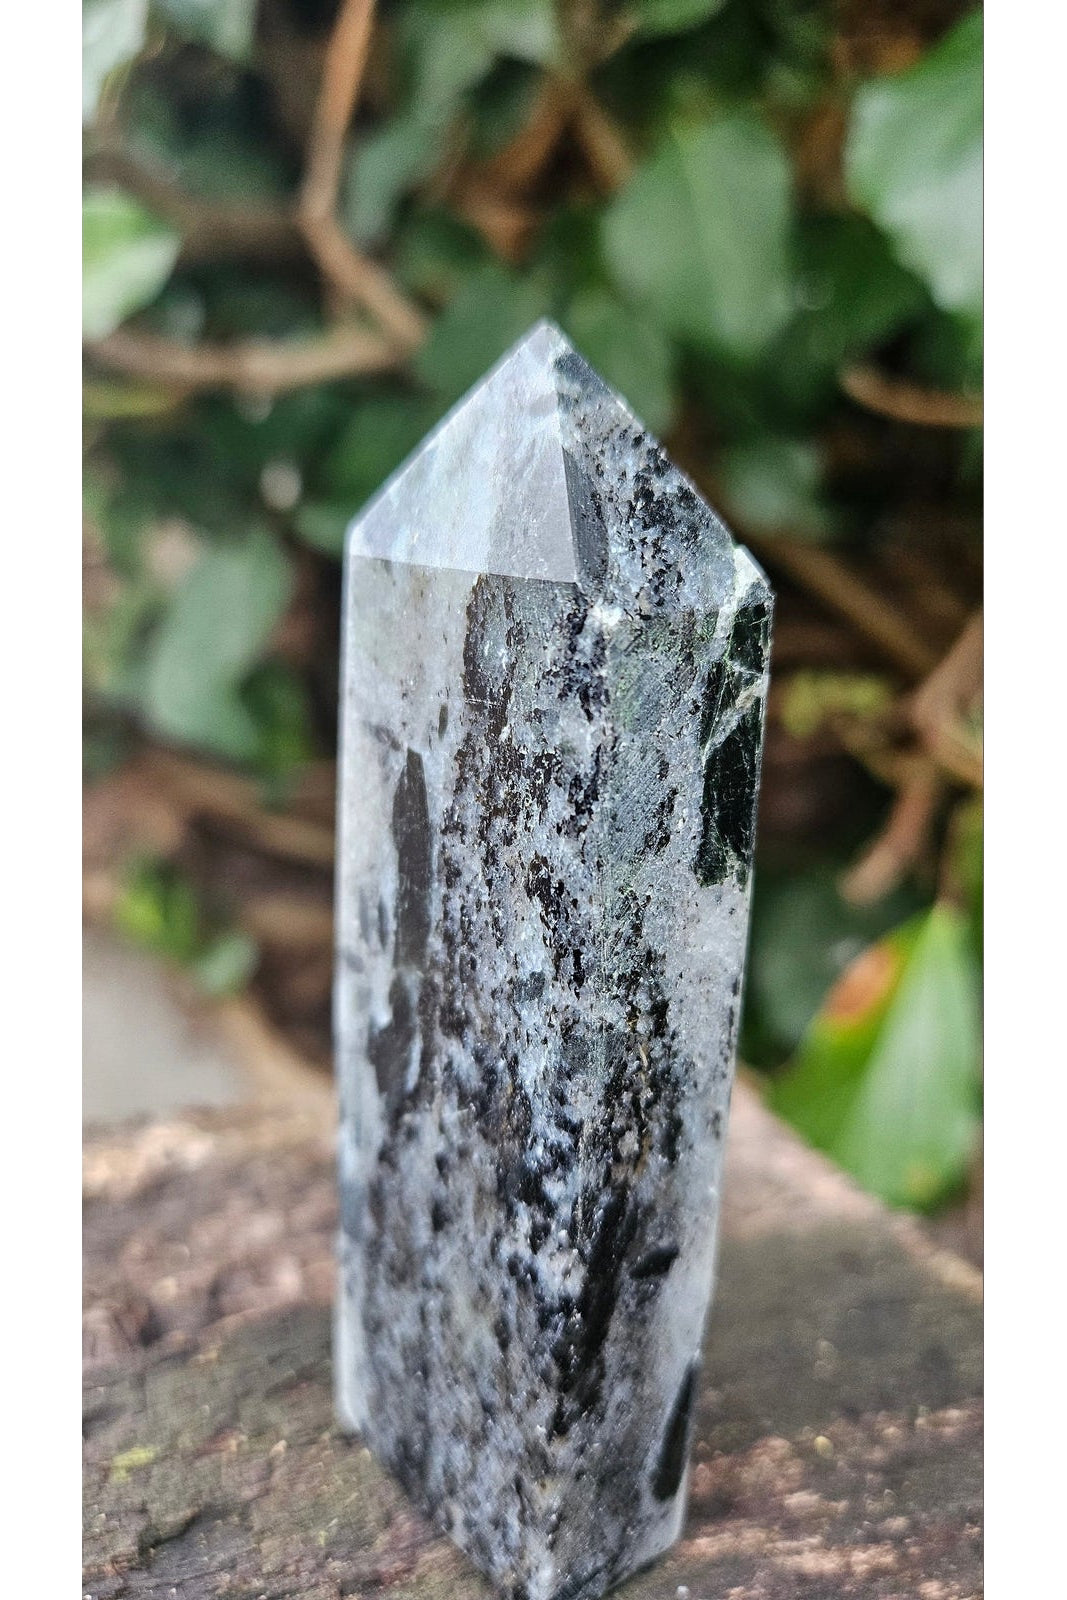 Black Tourmaline Obelisk - Purifying Energy and Reinforced Protection